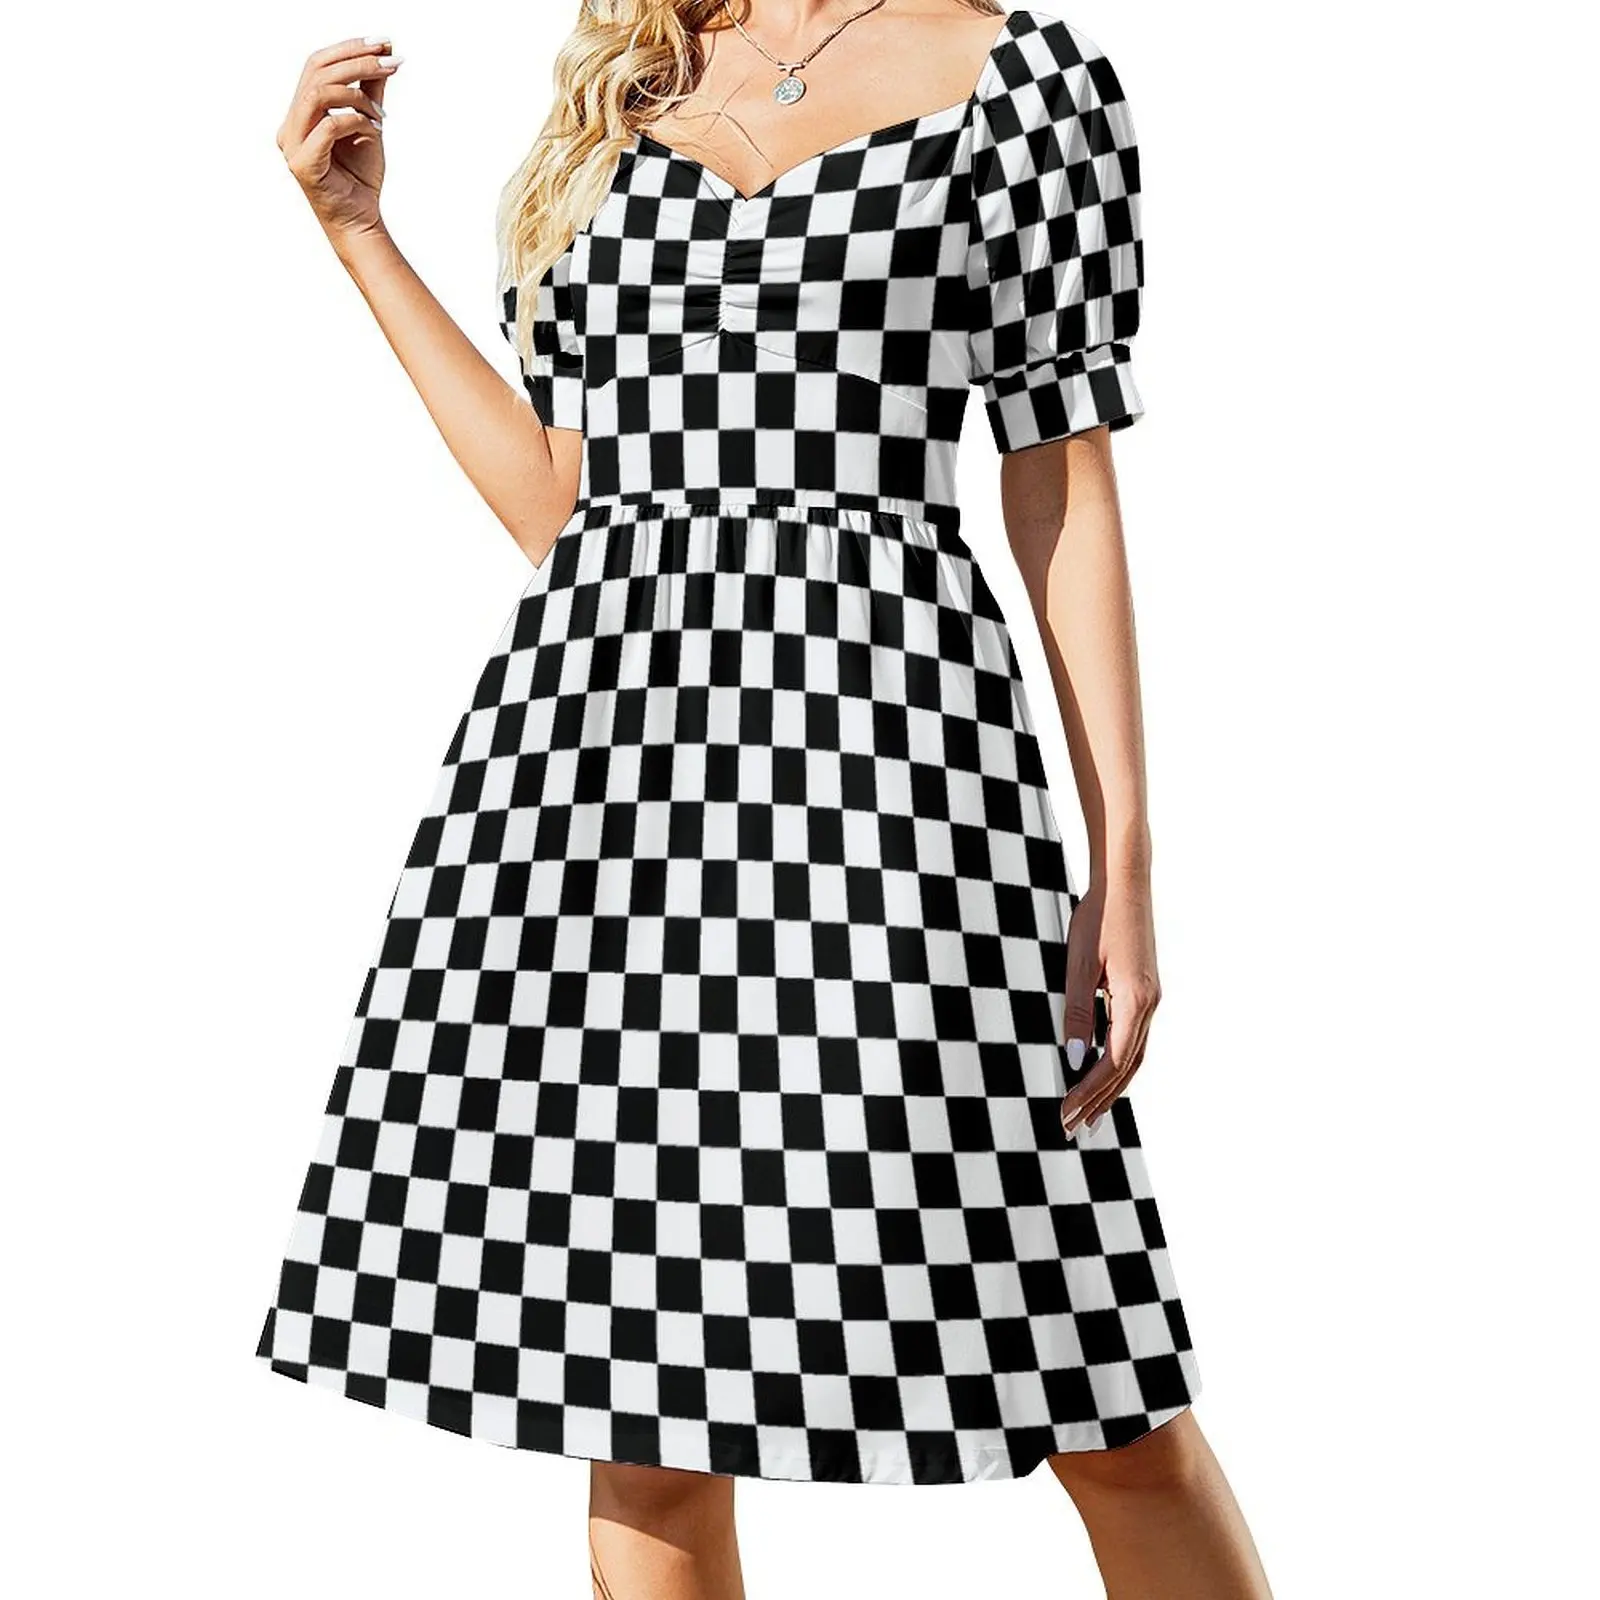 

Black And White Check Print Dress Checkerboard Style Dresses Summer Aesthetic Casual Dress Design Vestido Big Size 4XL 5XL